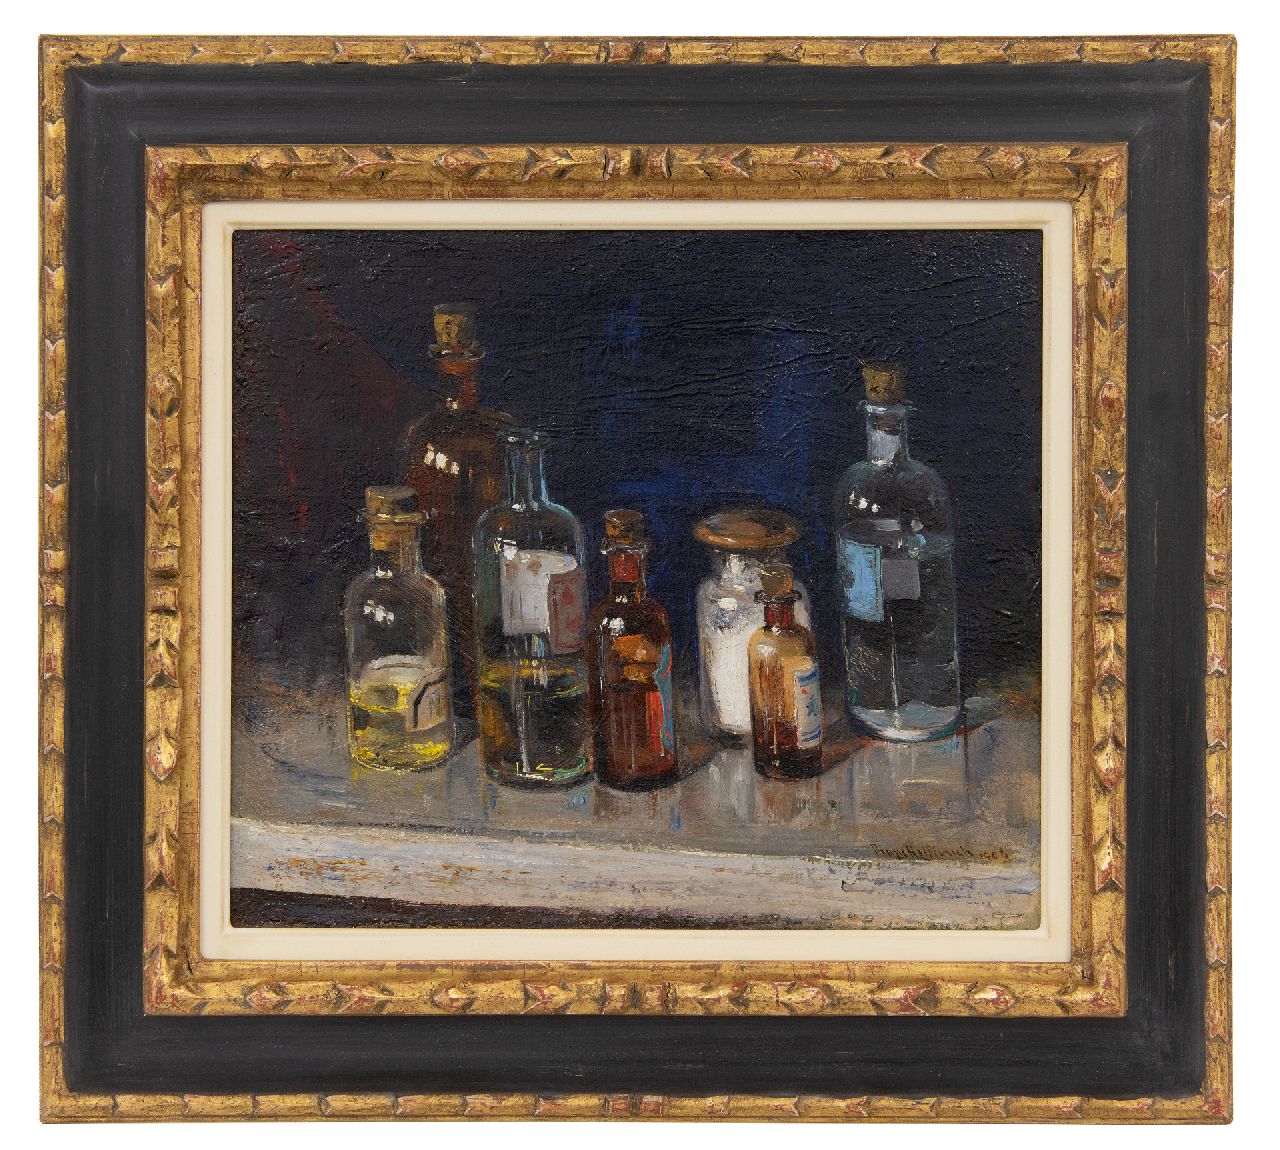 Helfferich F.W.  | Franciscus Willem 'Frans' Helfferich, Stil life with glass bottles, oil on canvas 30.2 x 34.5 cm, signed l.r. and dated 1906